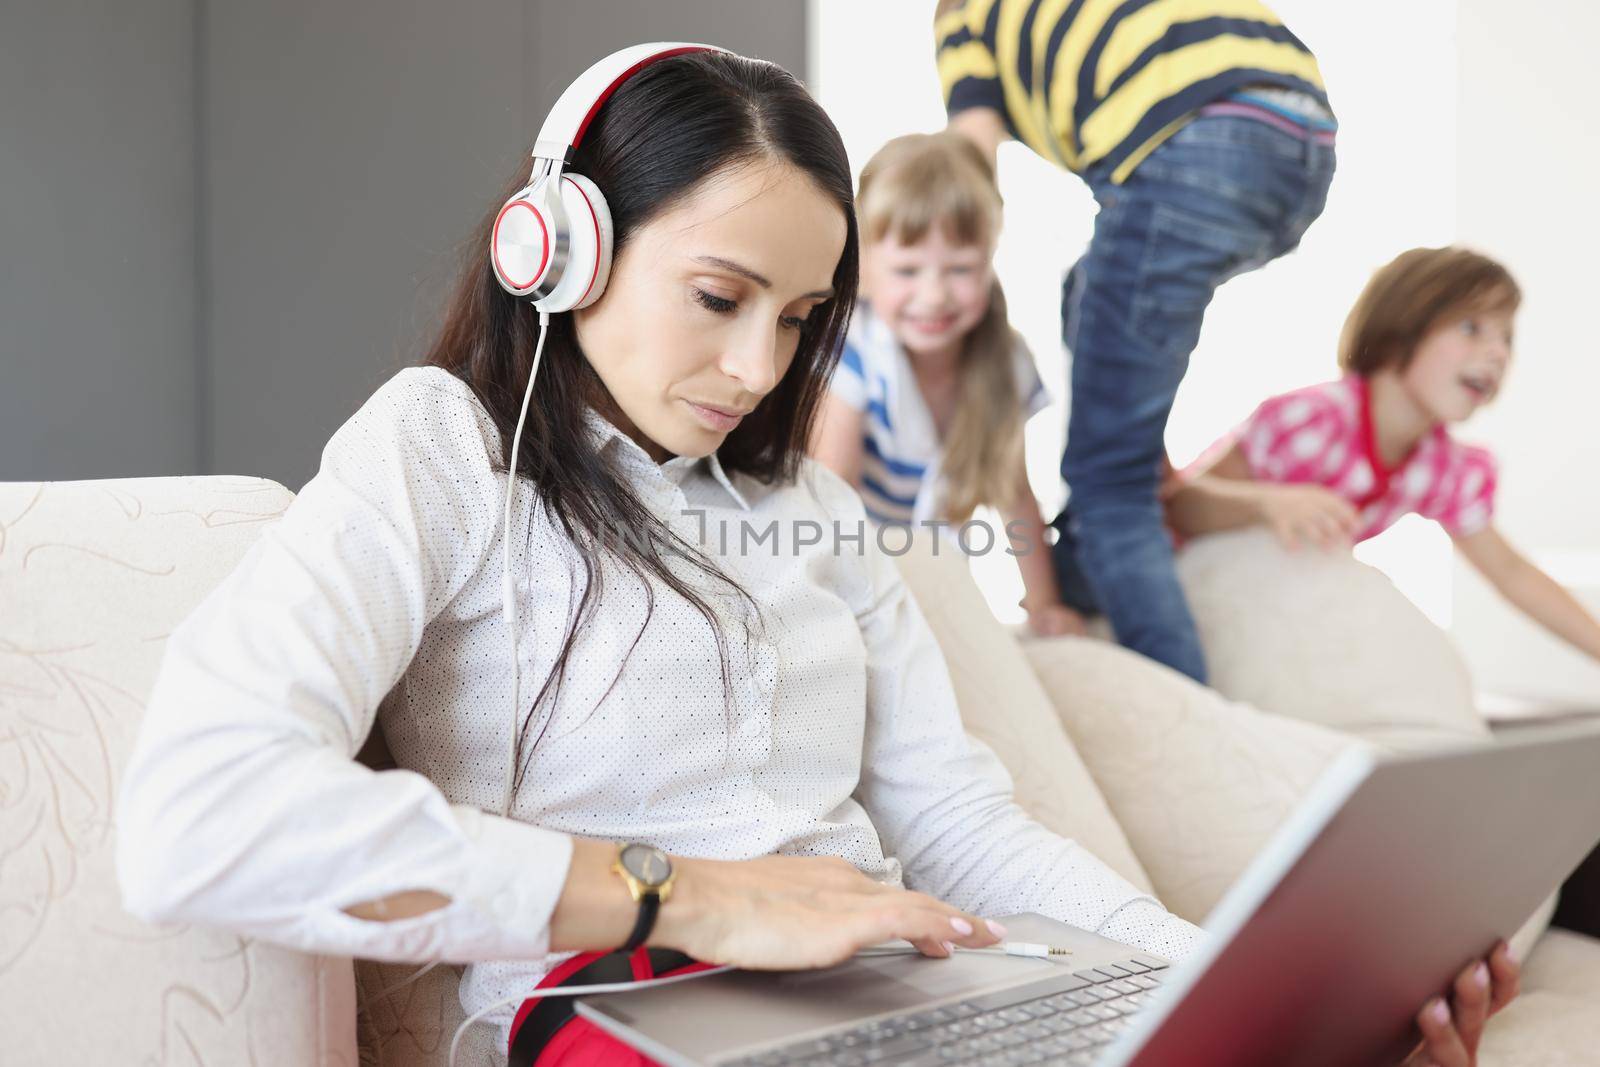 Young woman in headphones and with laptop sitting on sofa near playing children. Challenges of telecommuting during covid19 pandemic concept